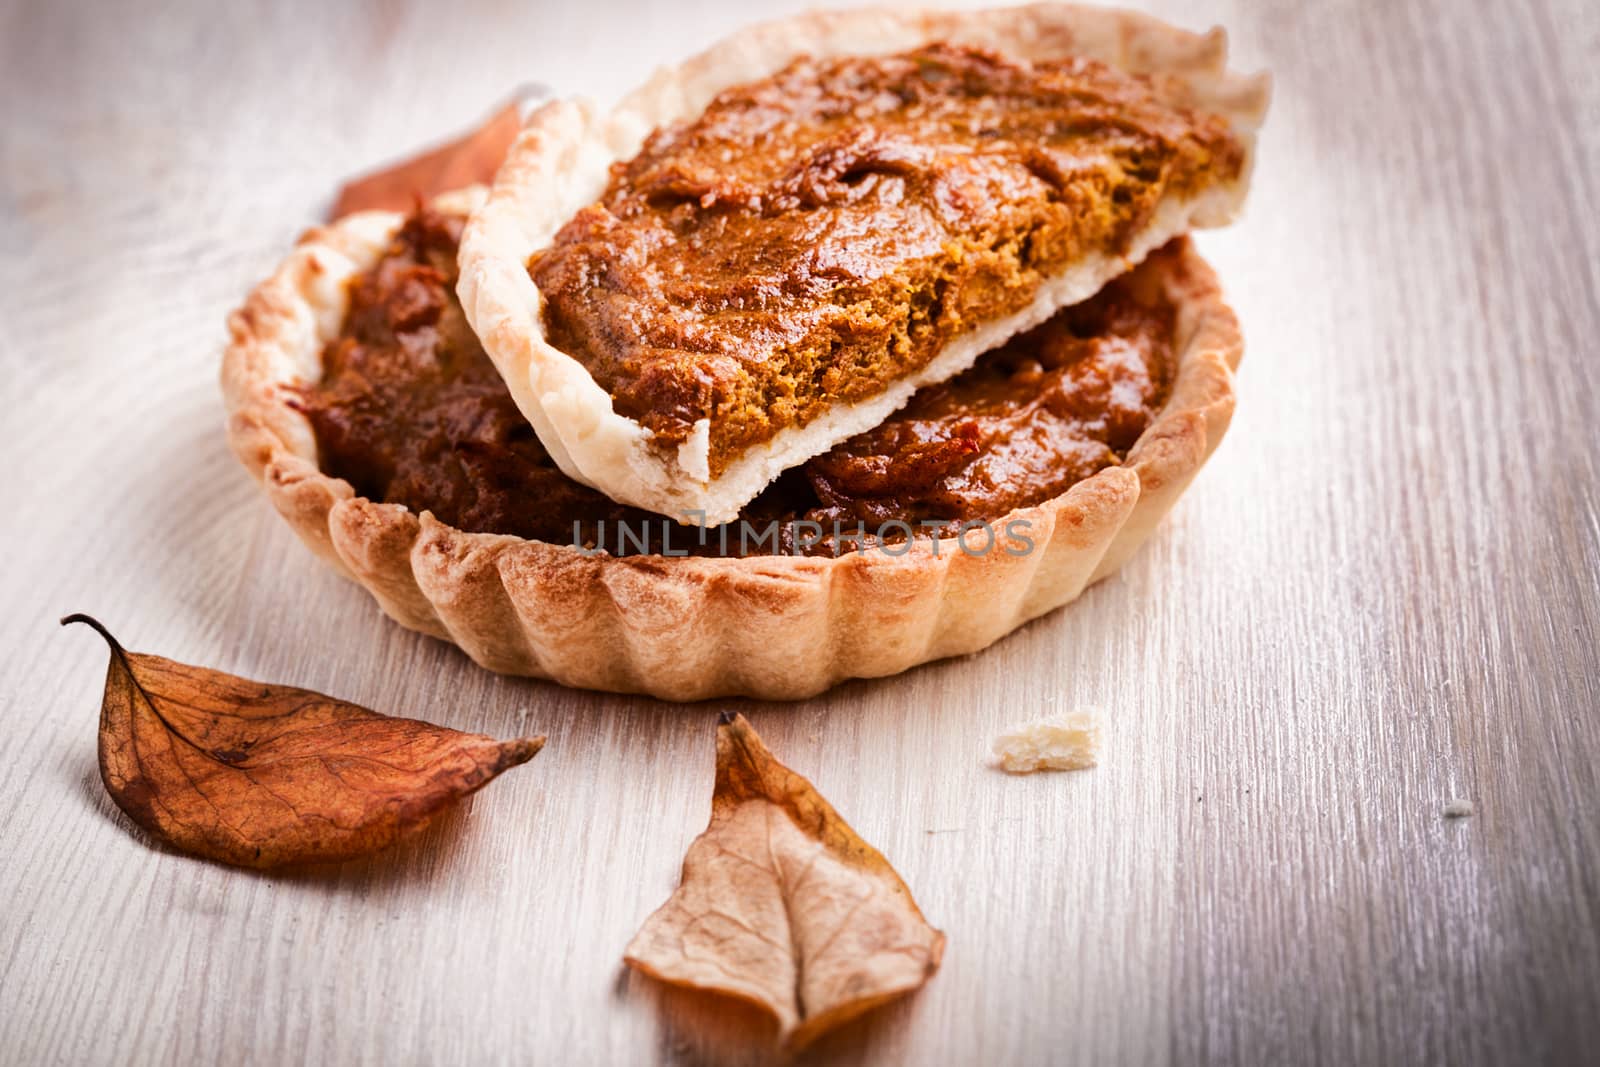 Slices of Pumpkin pie on a stone surface